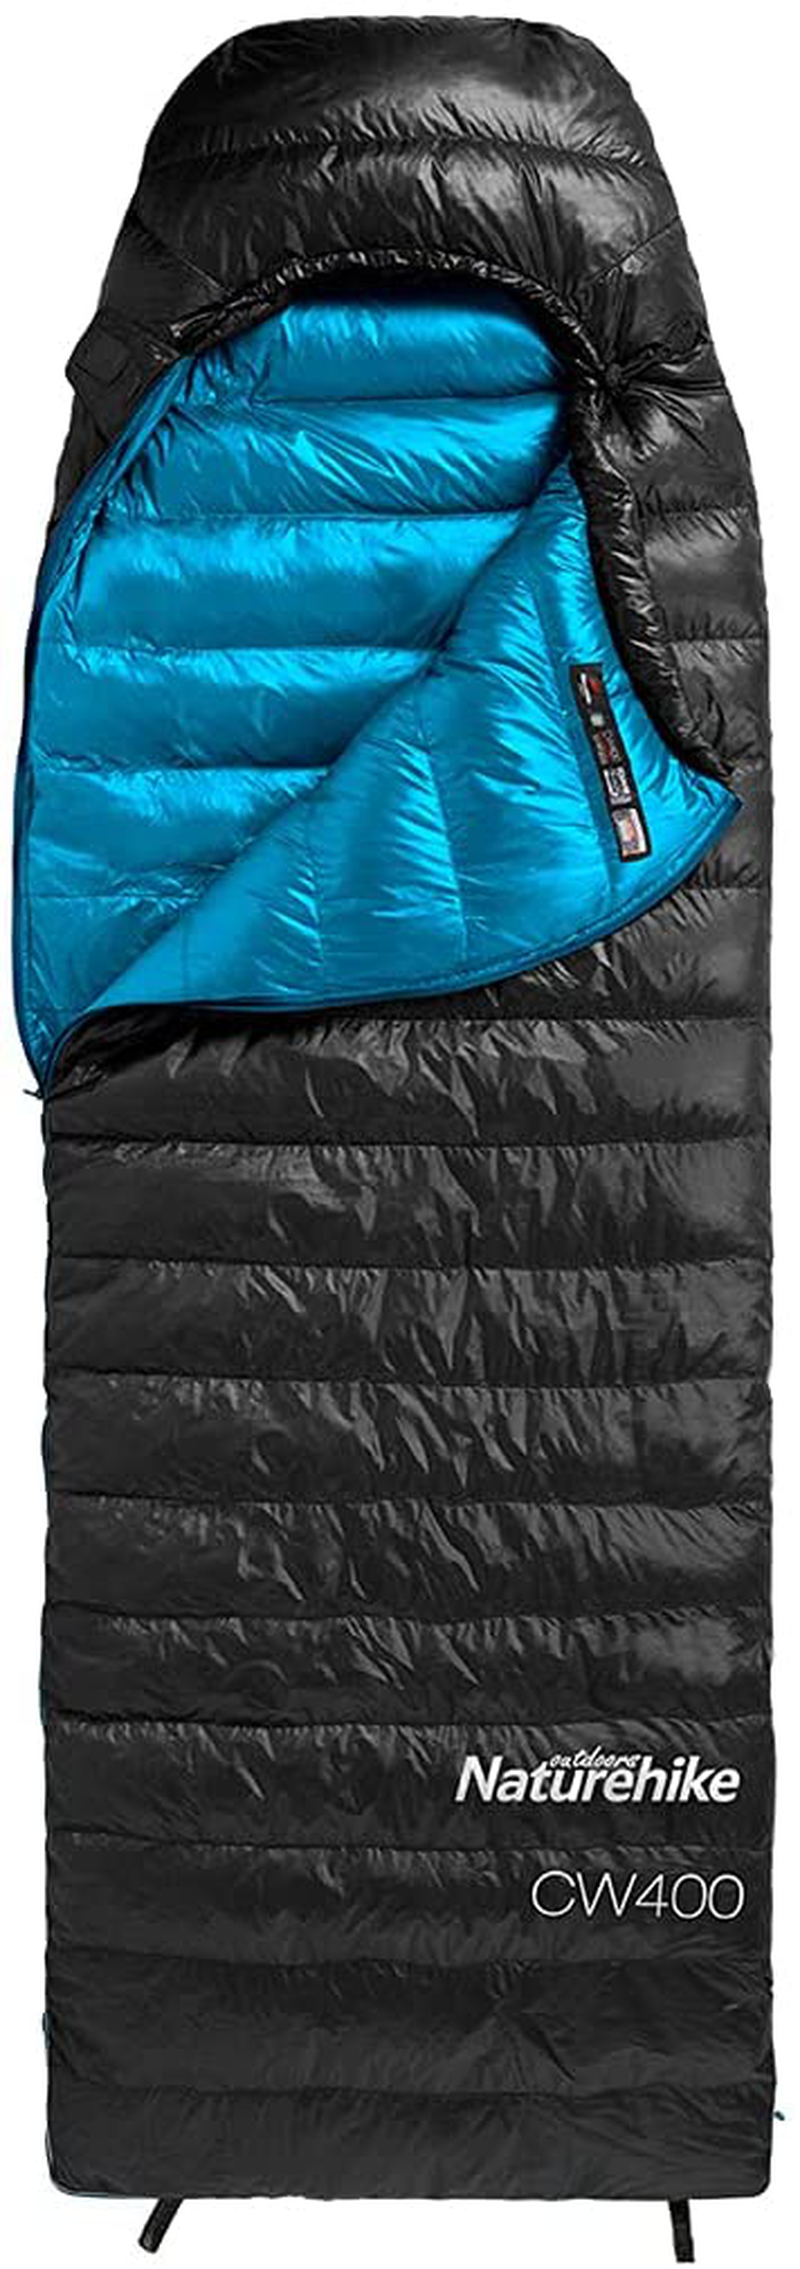 Naturehike Ultralight Goose down Sleeping Bag 750 Fill Power 4 Season Waterproof Compact for Adults & Kids -Cold Weather Sleeping Bags for Camping, Backpacking, Hiking, Traveling, Outdoor with Compression Sack